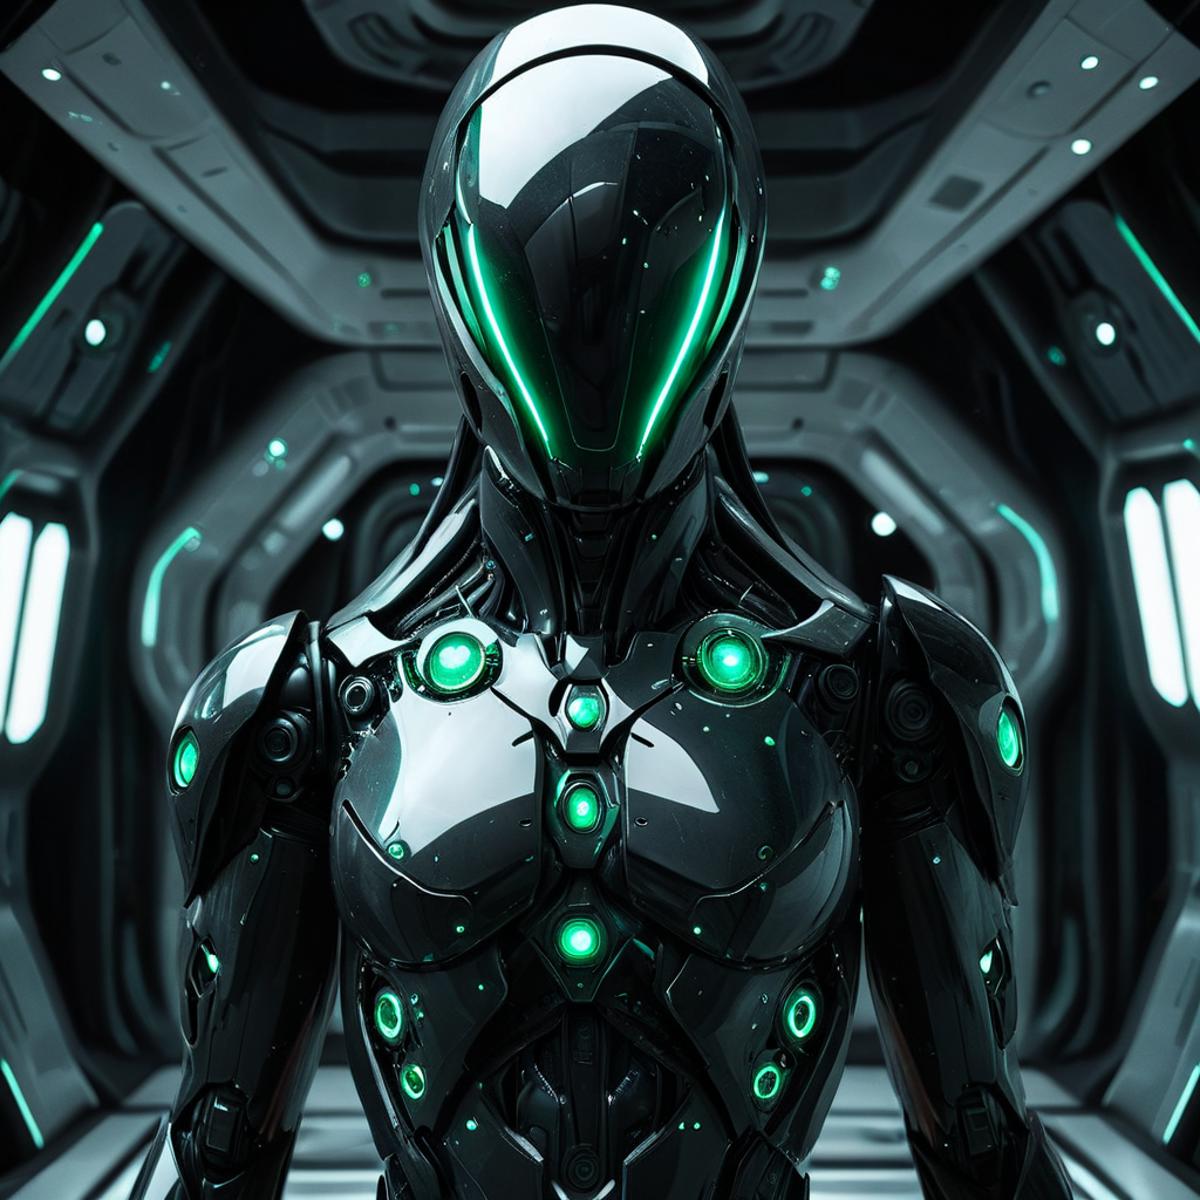 A Robotic Suit with Green Lights on the Chest and Shoulder